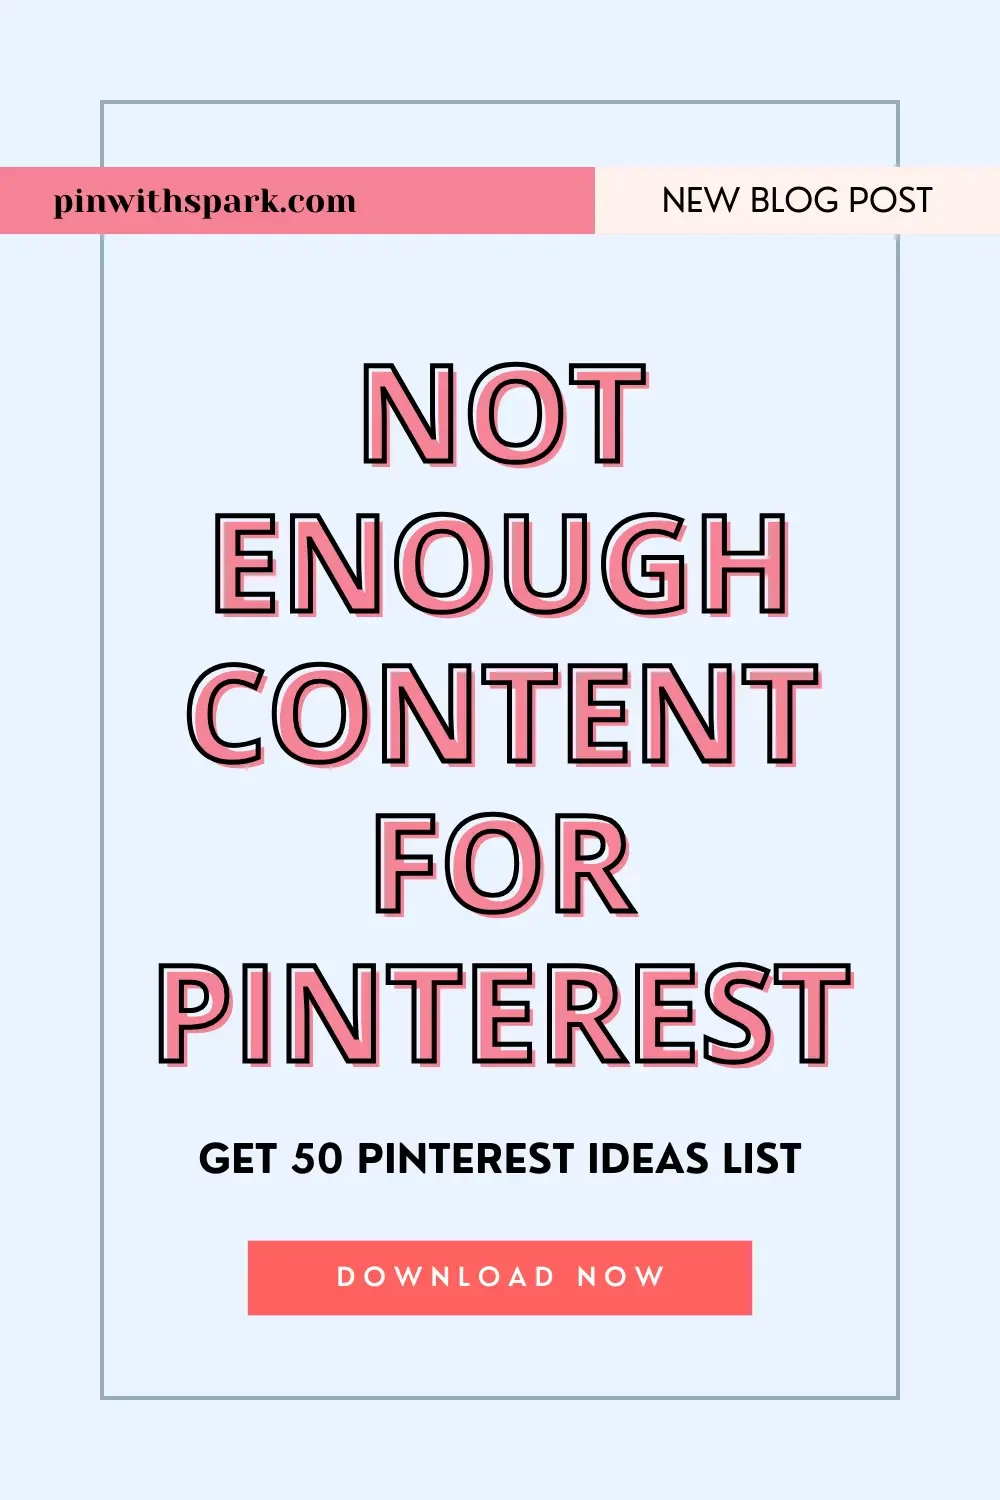 Not enough content for pinterest text overlay pinwithspark.com